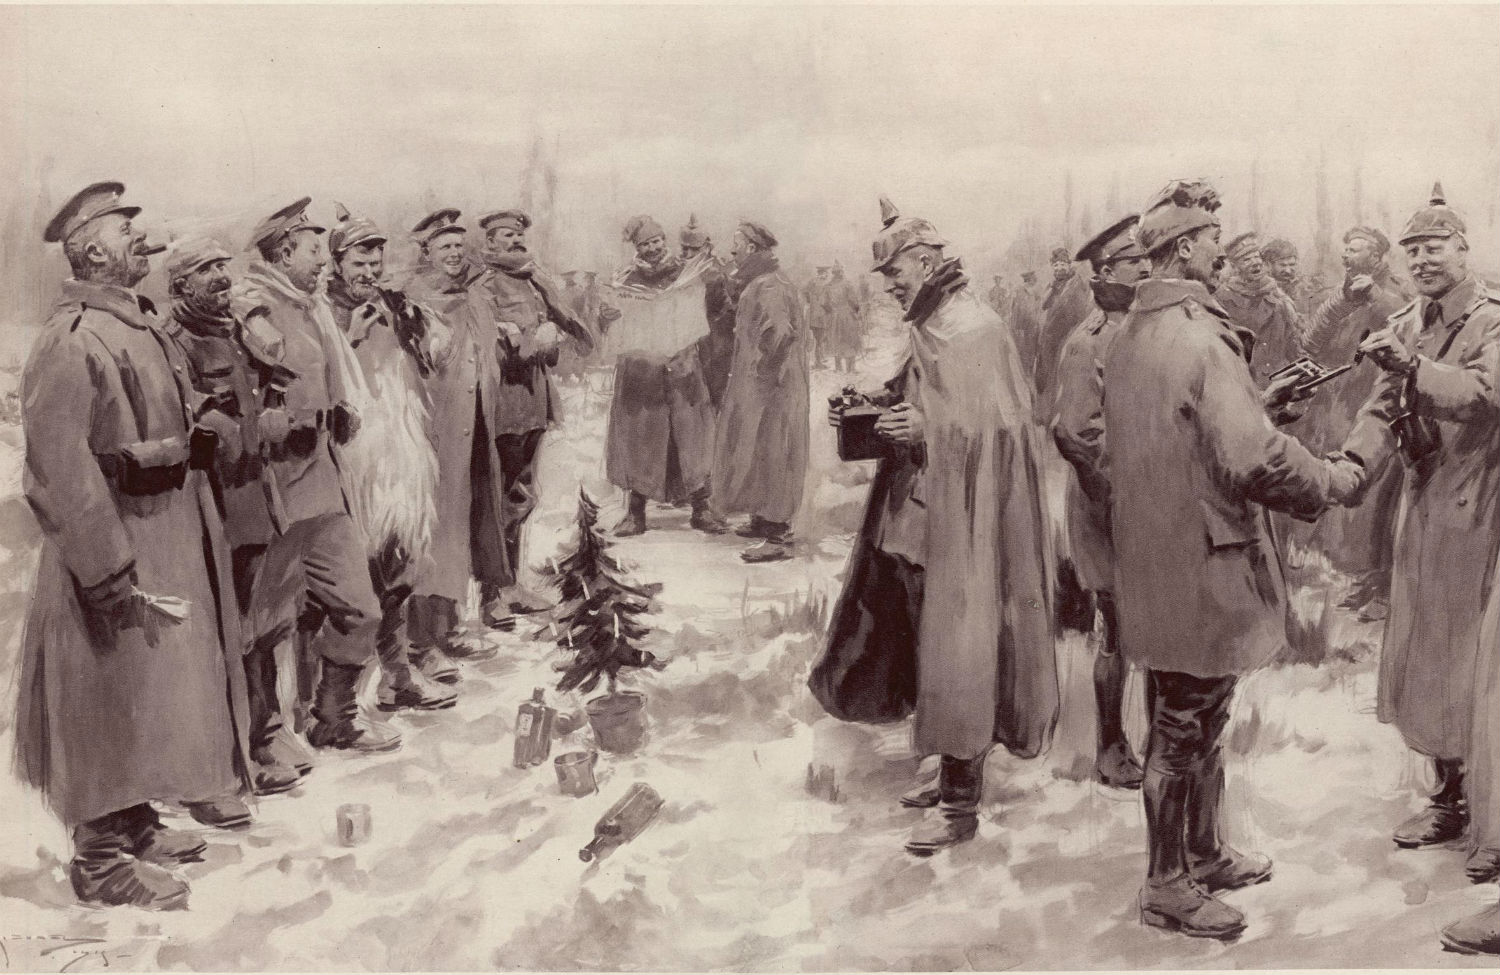 The Day the Troops Refused to Fight: December 25, 1914